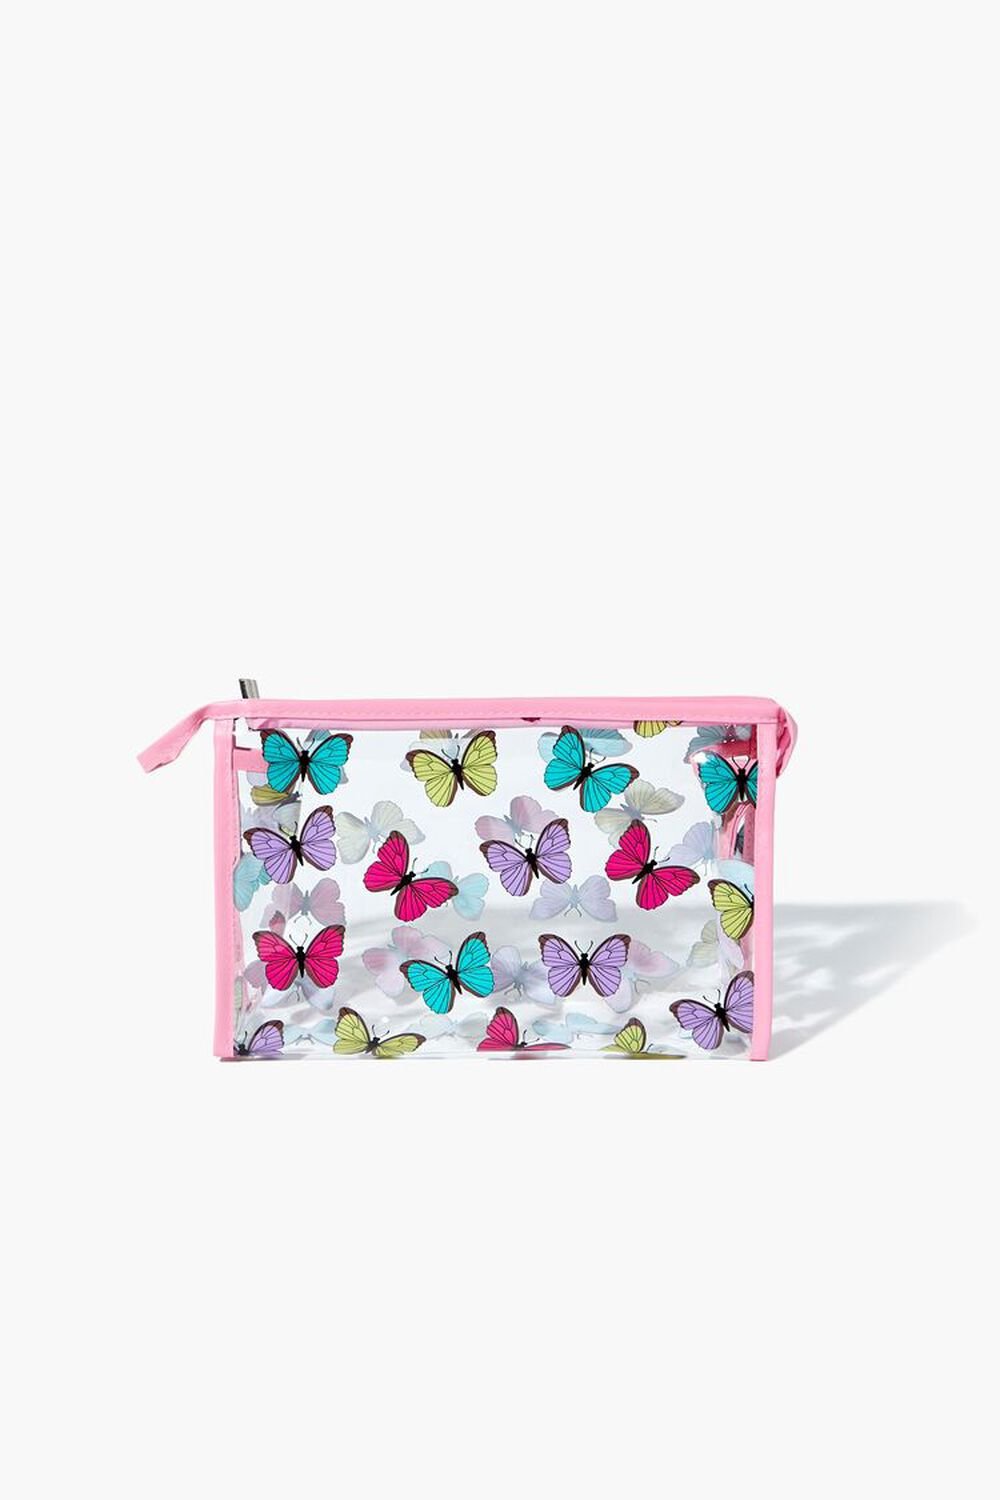 CLEAR/MULTI Butterfly Print Makeup Bag, image 1